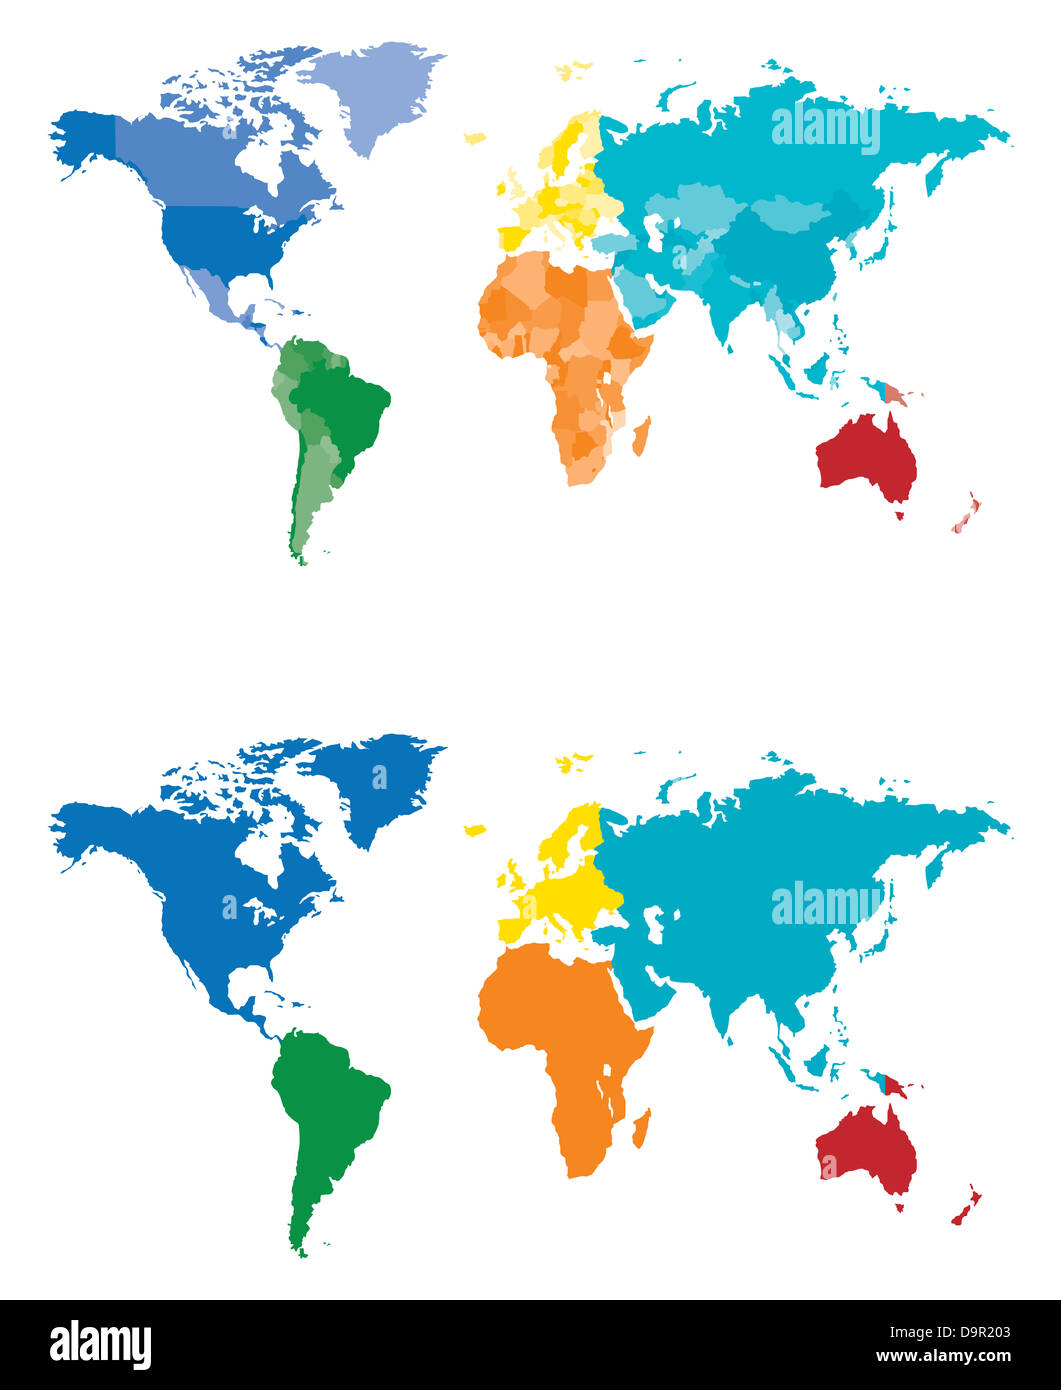 Continent and Country map separated by color Stock Photo